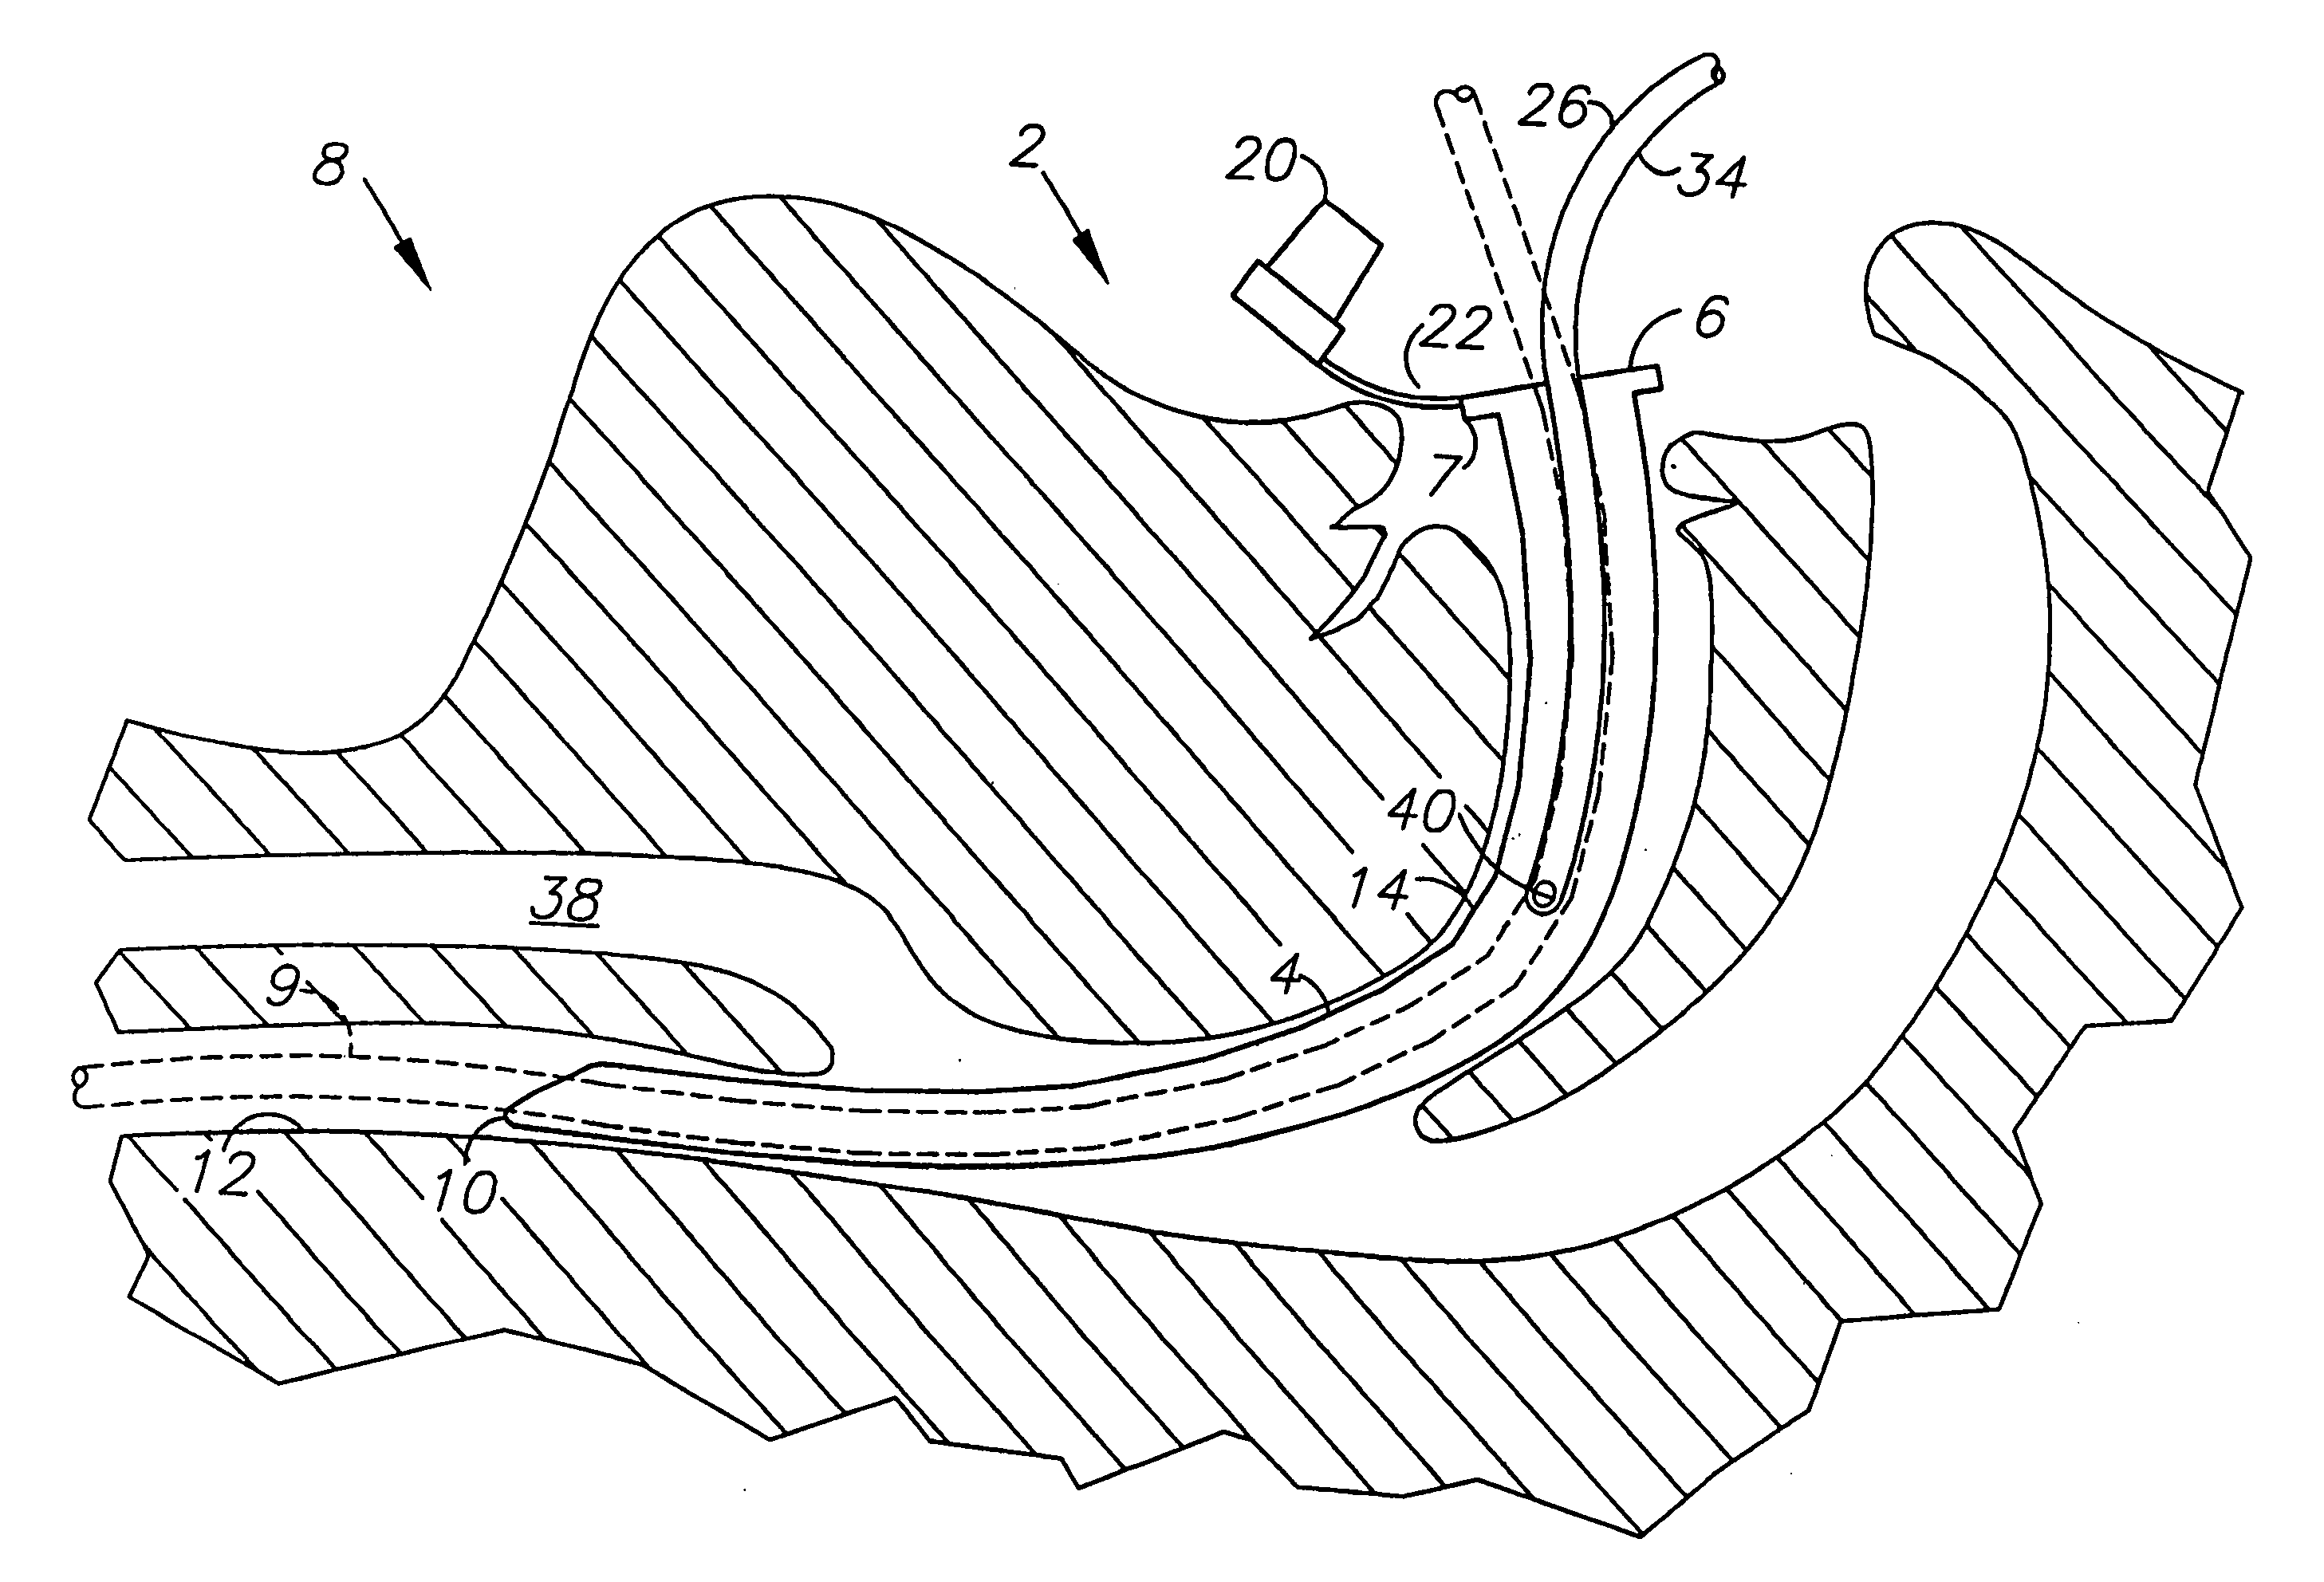 Esophageal intubation and airway management system and method